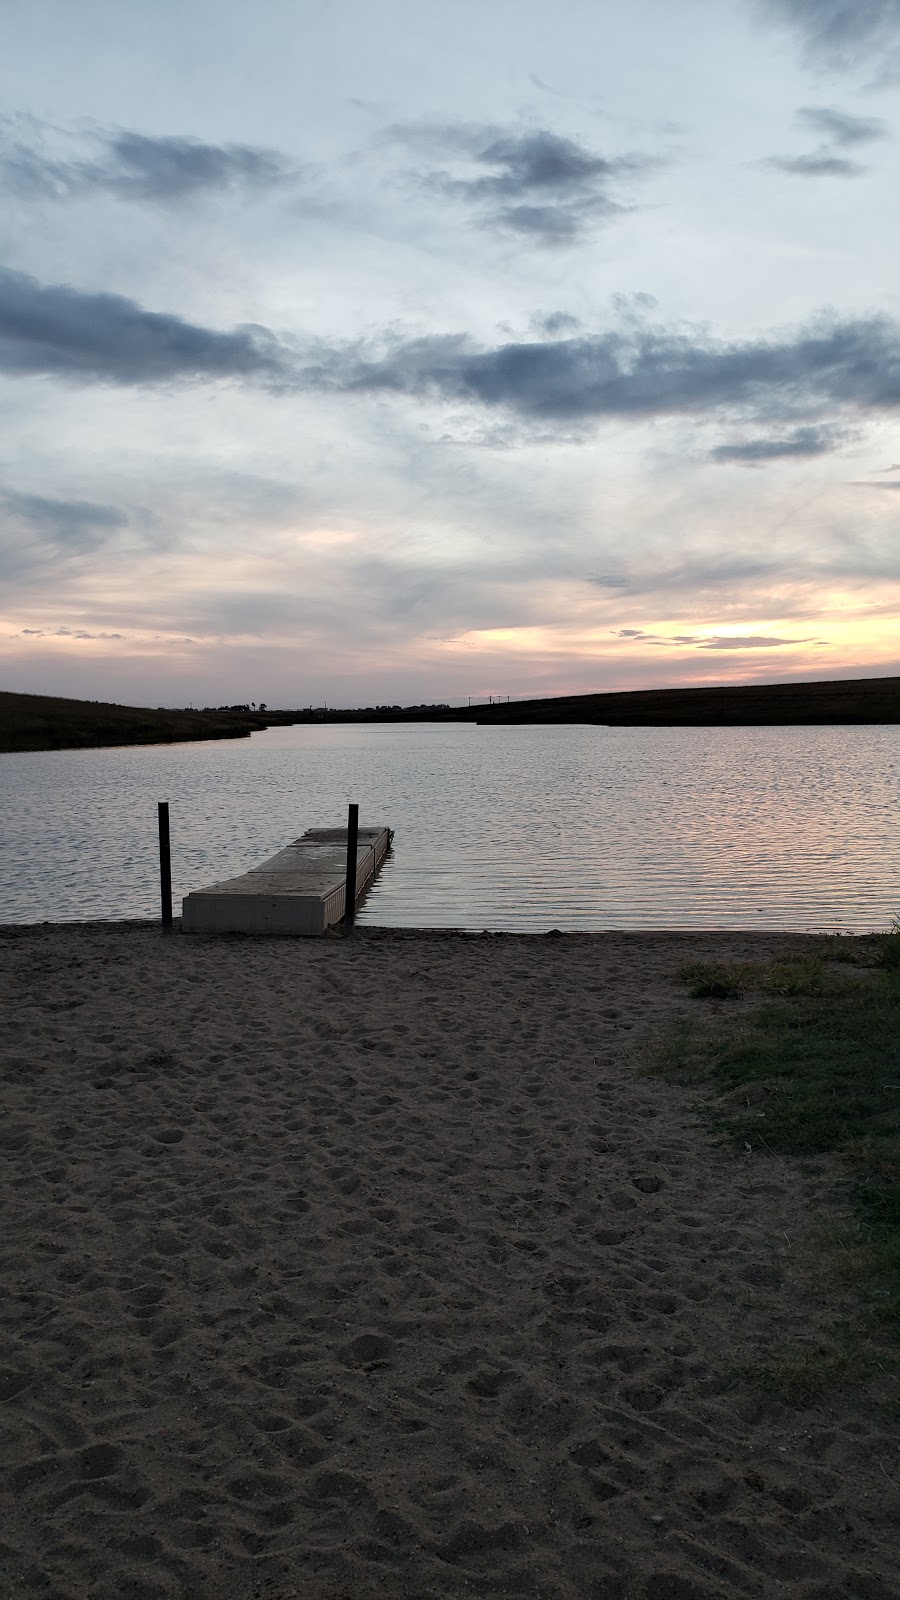 Town of Taber Trout Pond Campground | campground | 3200 Trout Pond Avenue, Taber, AB T1G 0A7, Canada | 4032235544 OR +1 403-223-5544